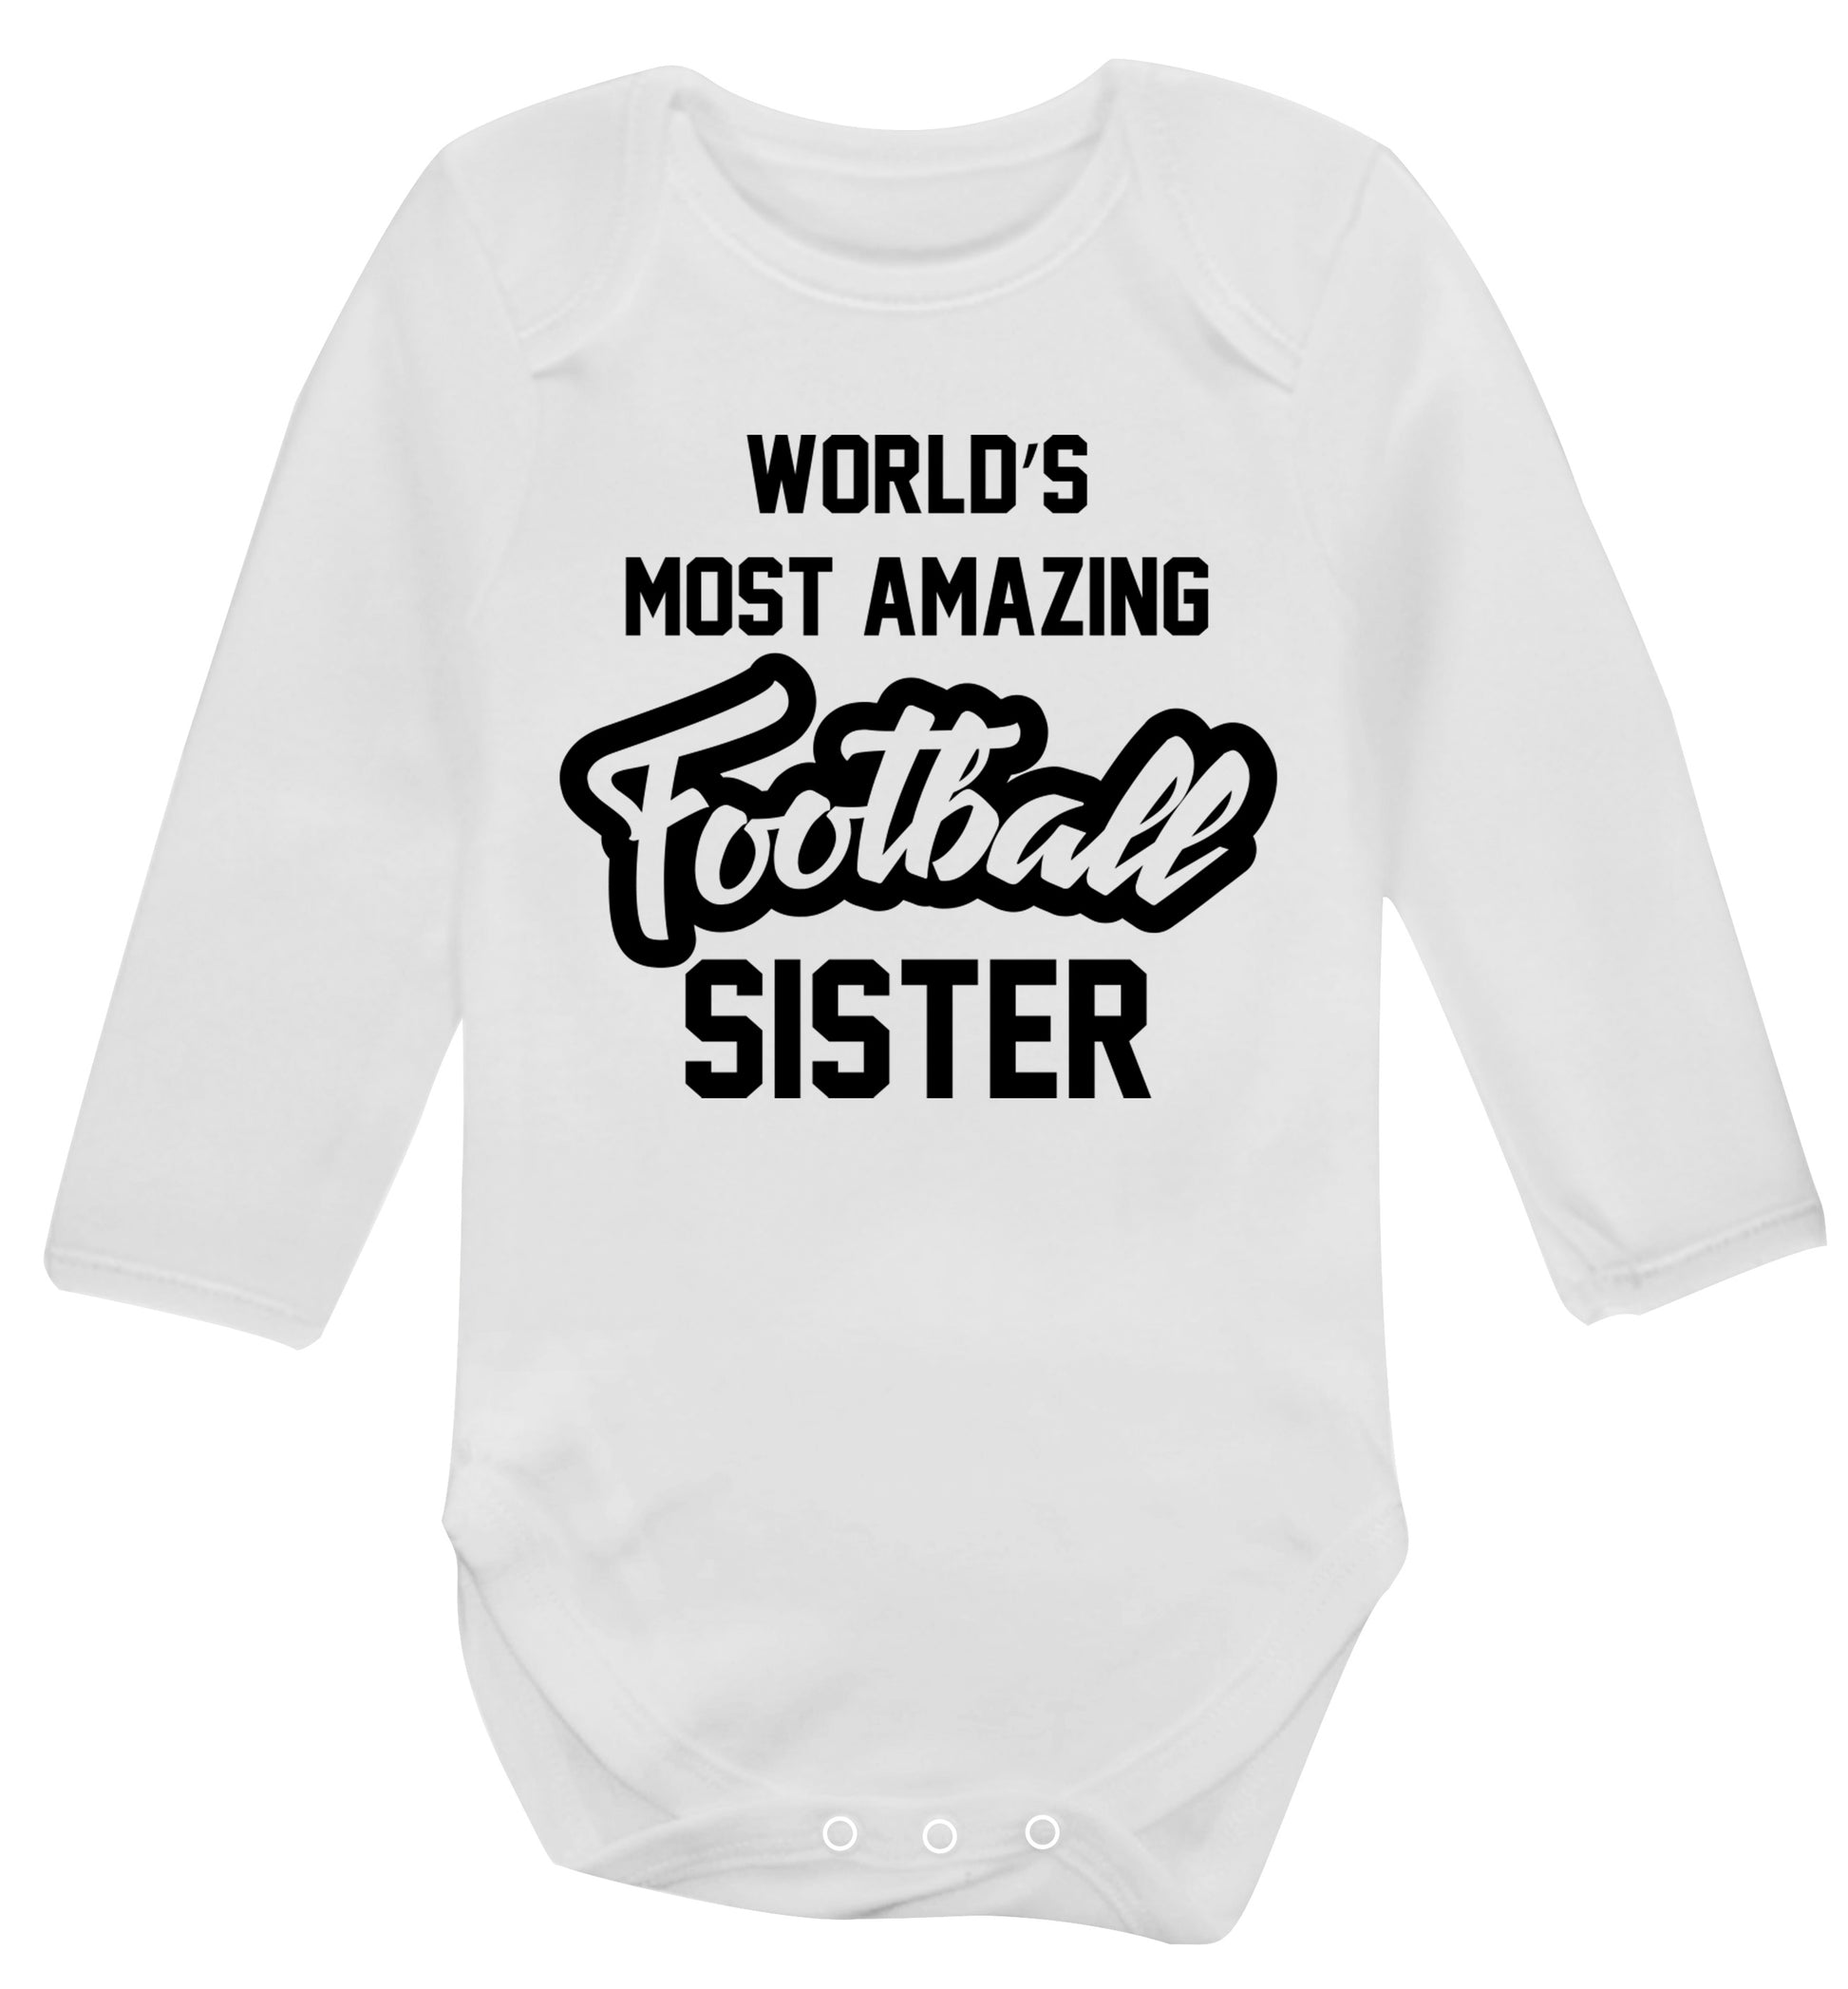 Worlds most amazing football sister Baby Vest long sleeved white 6-12 months